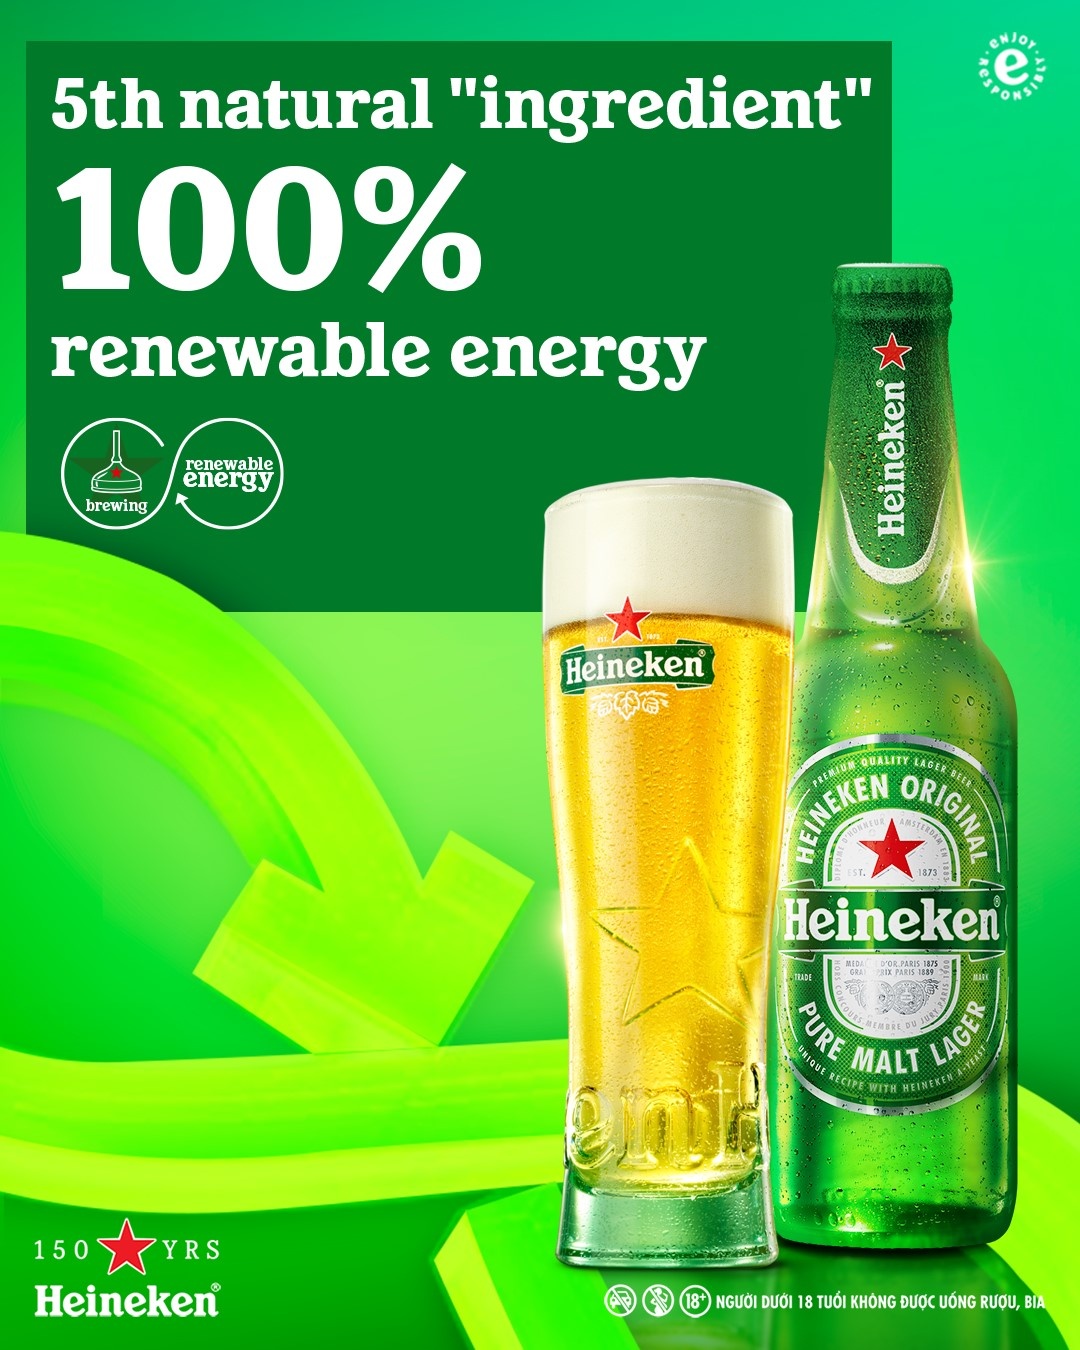 HEINEKEN Vietnam continues to cave a spot among Top 3 most sustainable businesses (PR)